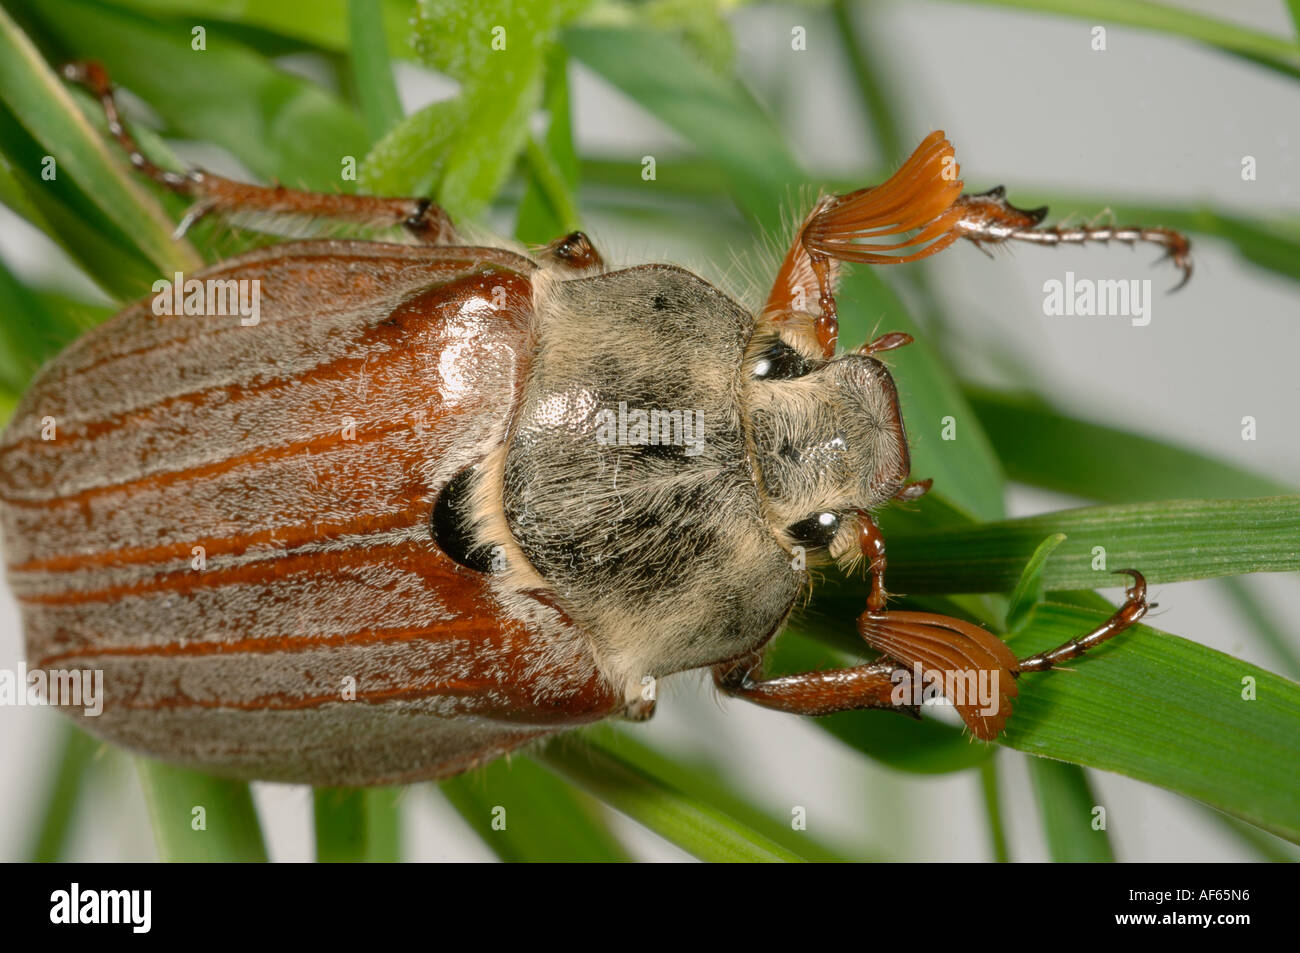 Adult cockchafer or may bug Melolontha melolontha on grass Stock Photo